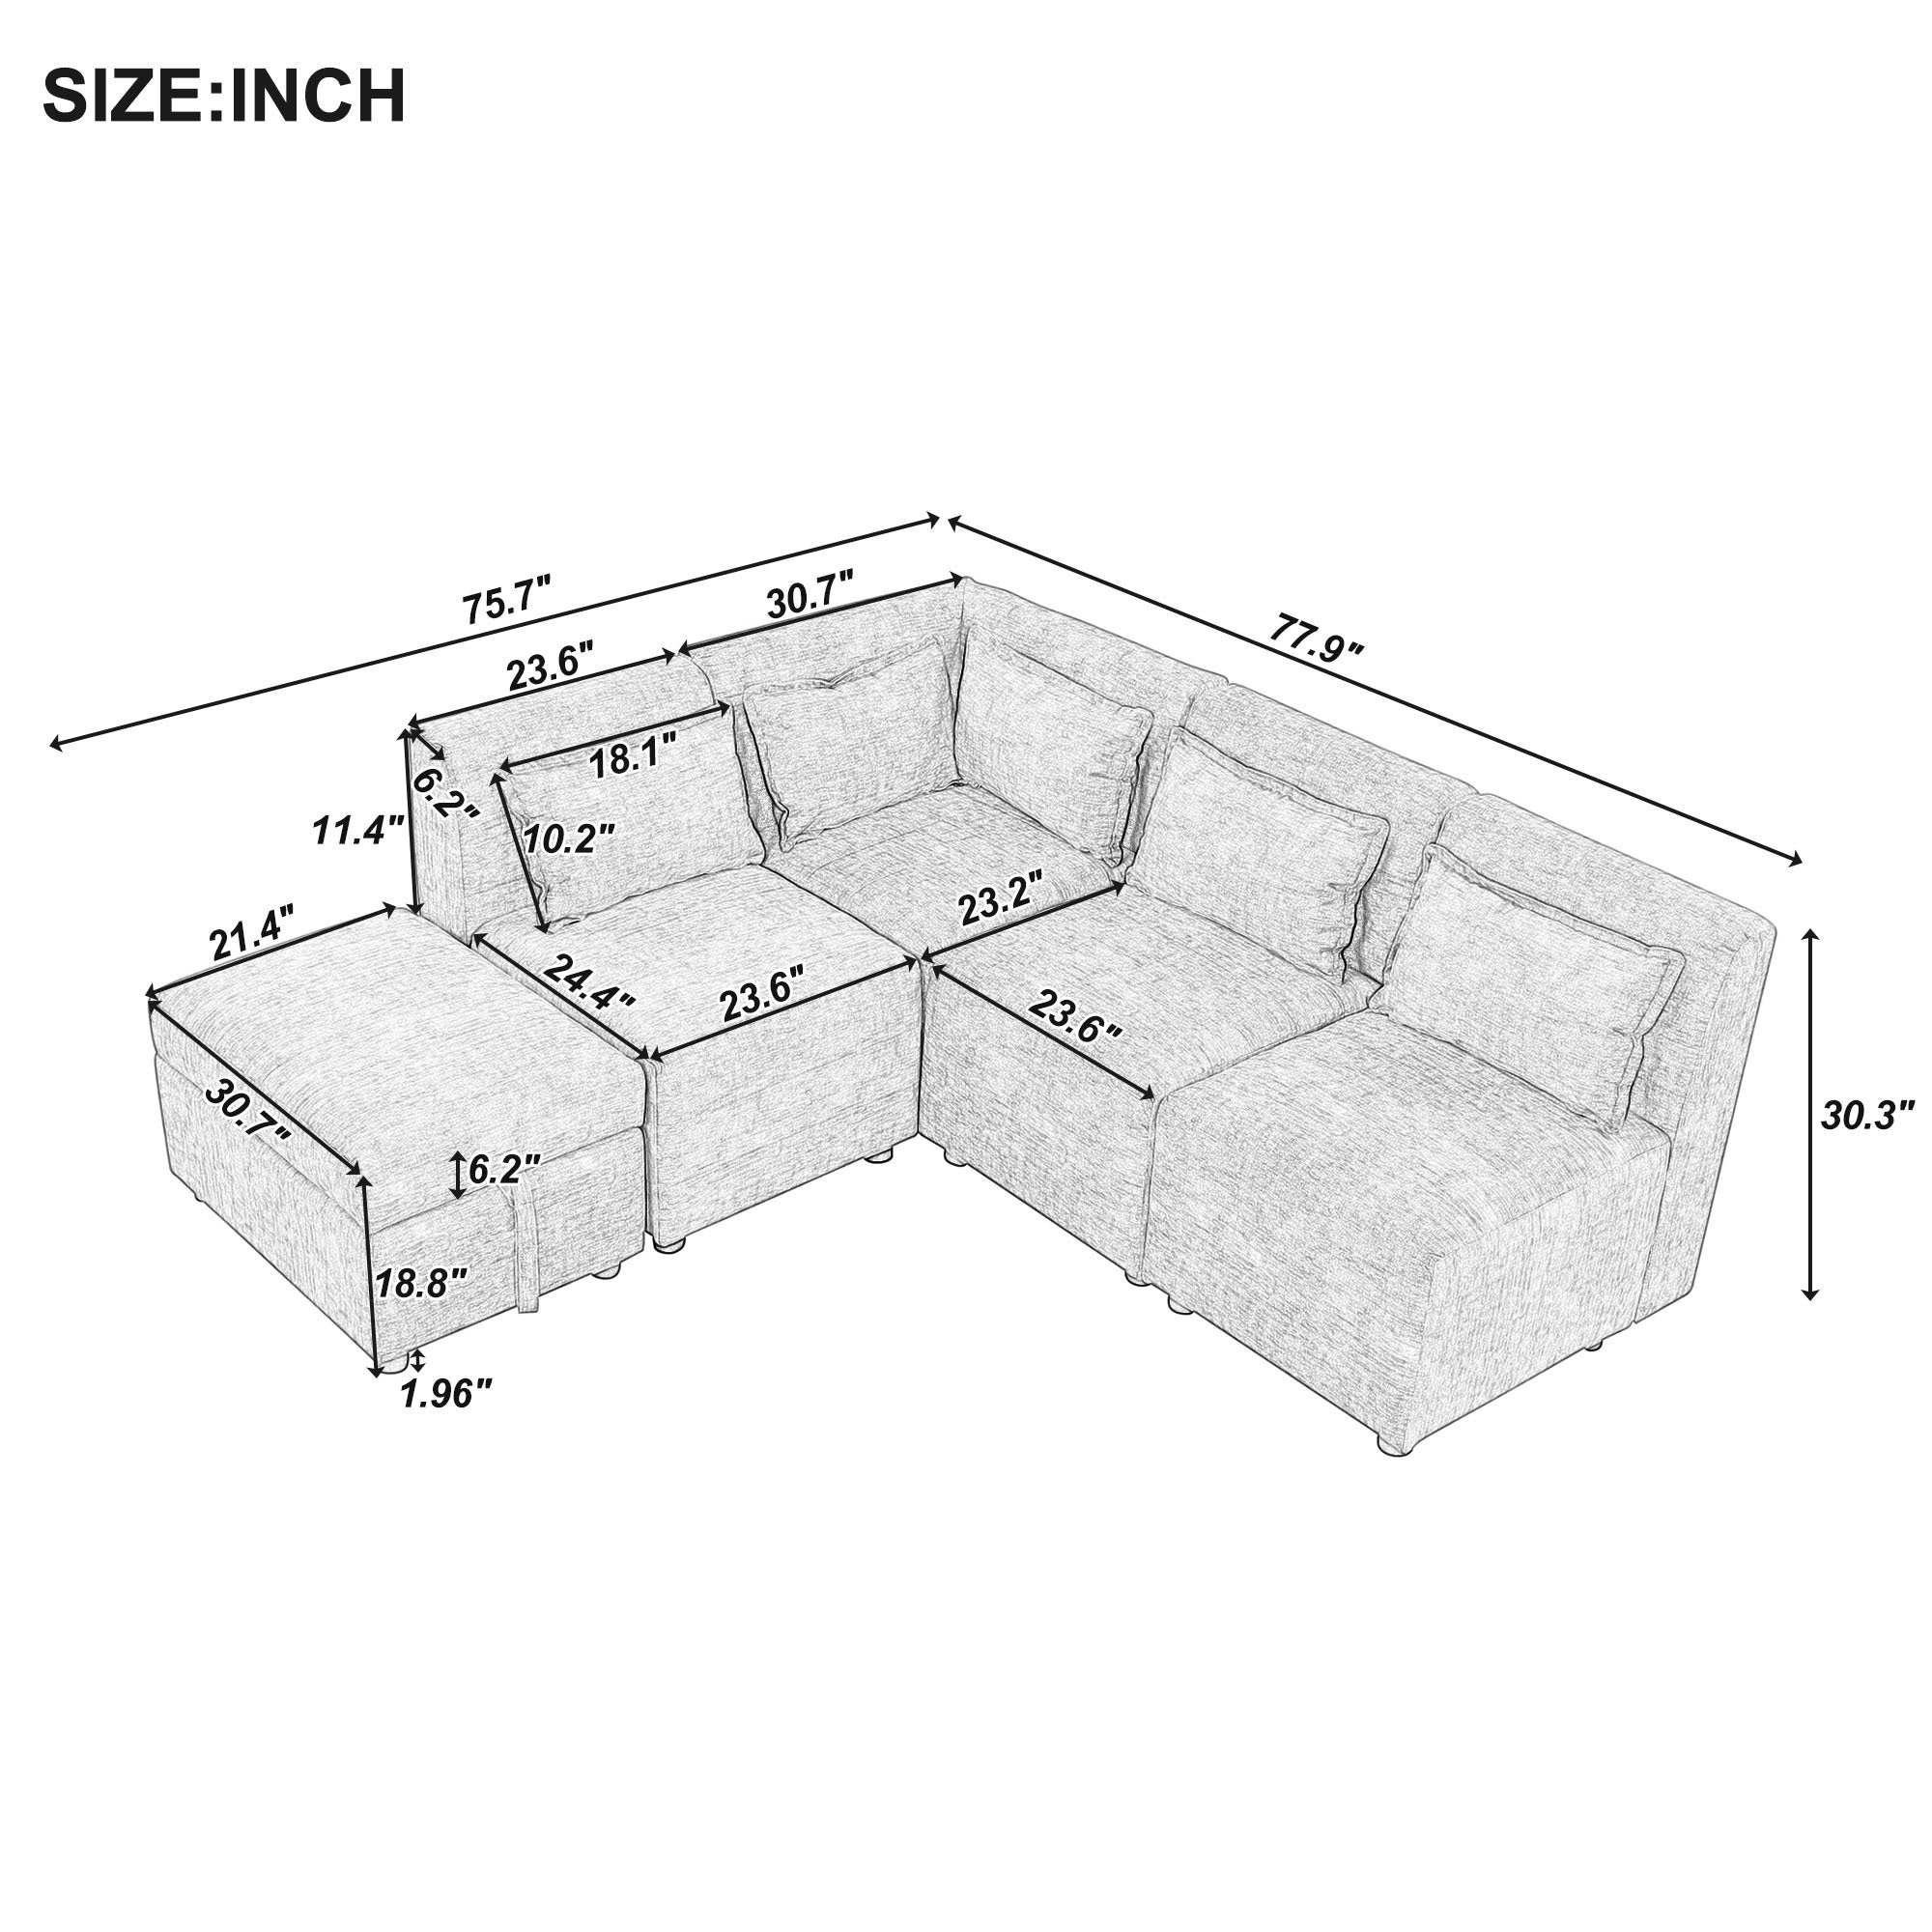 Free-Combined Sectional Sofa 5-seater Modular Couches with Storage - 6cf928715fe04a5bbf00d26d26613624